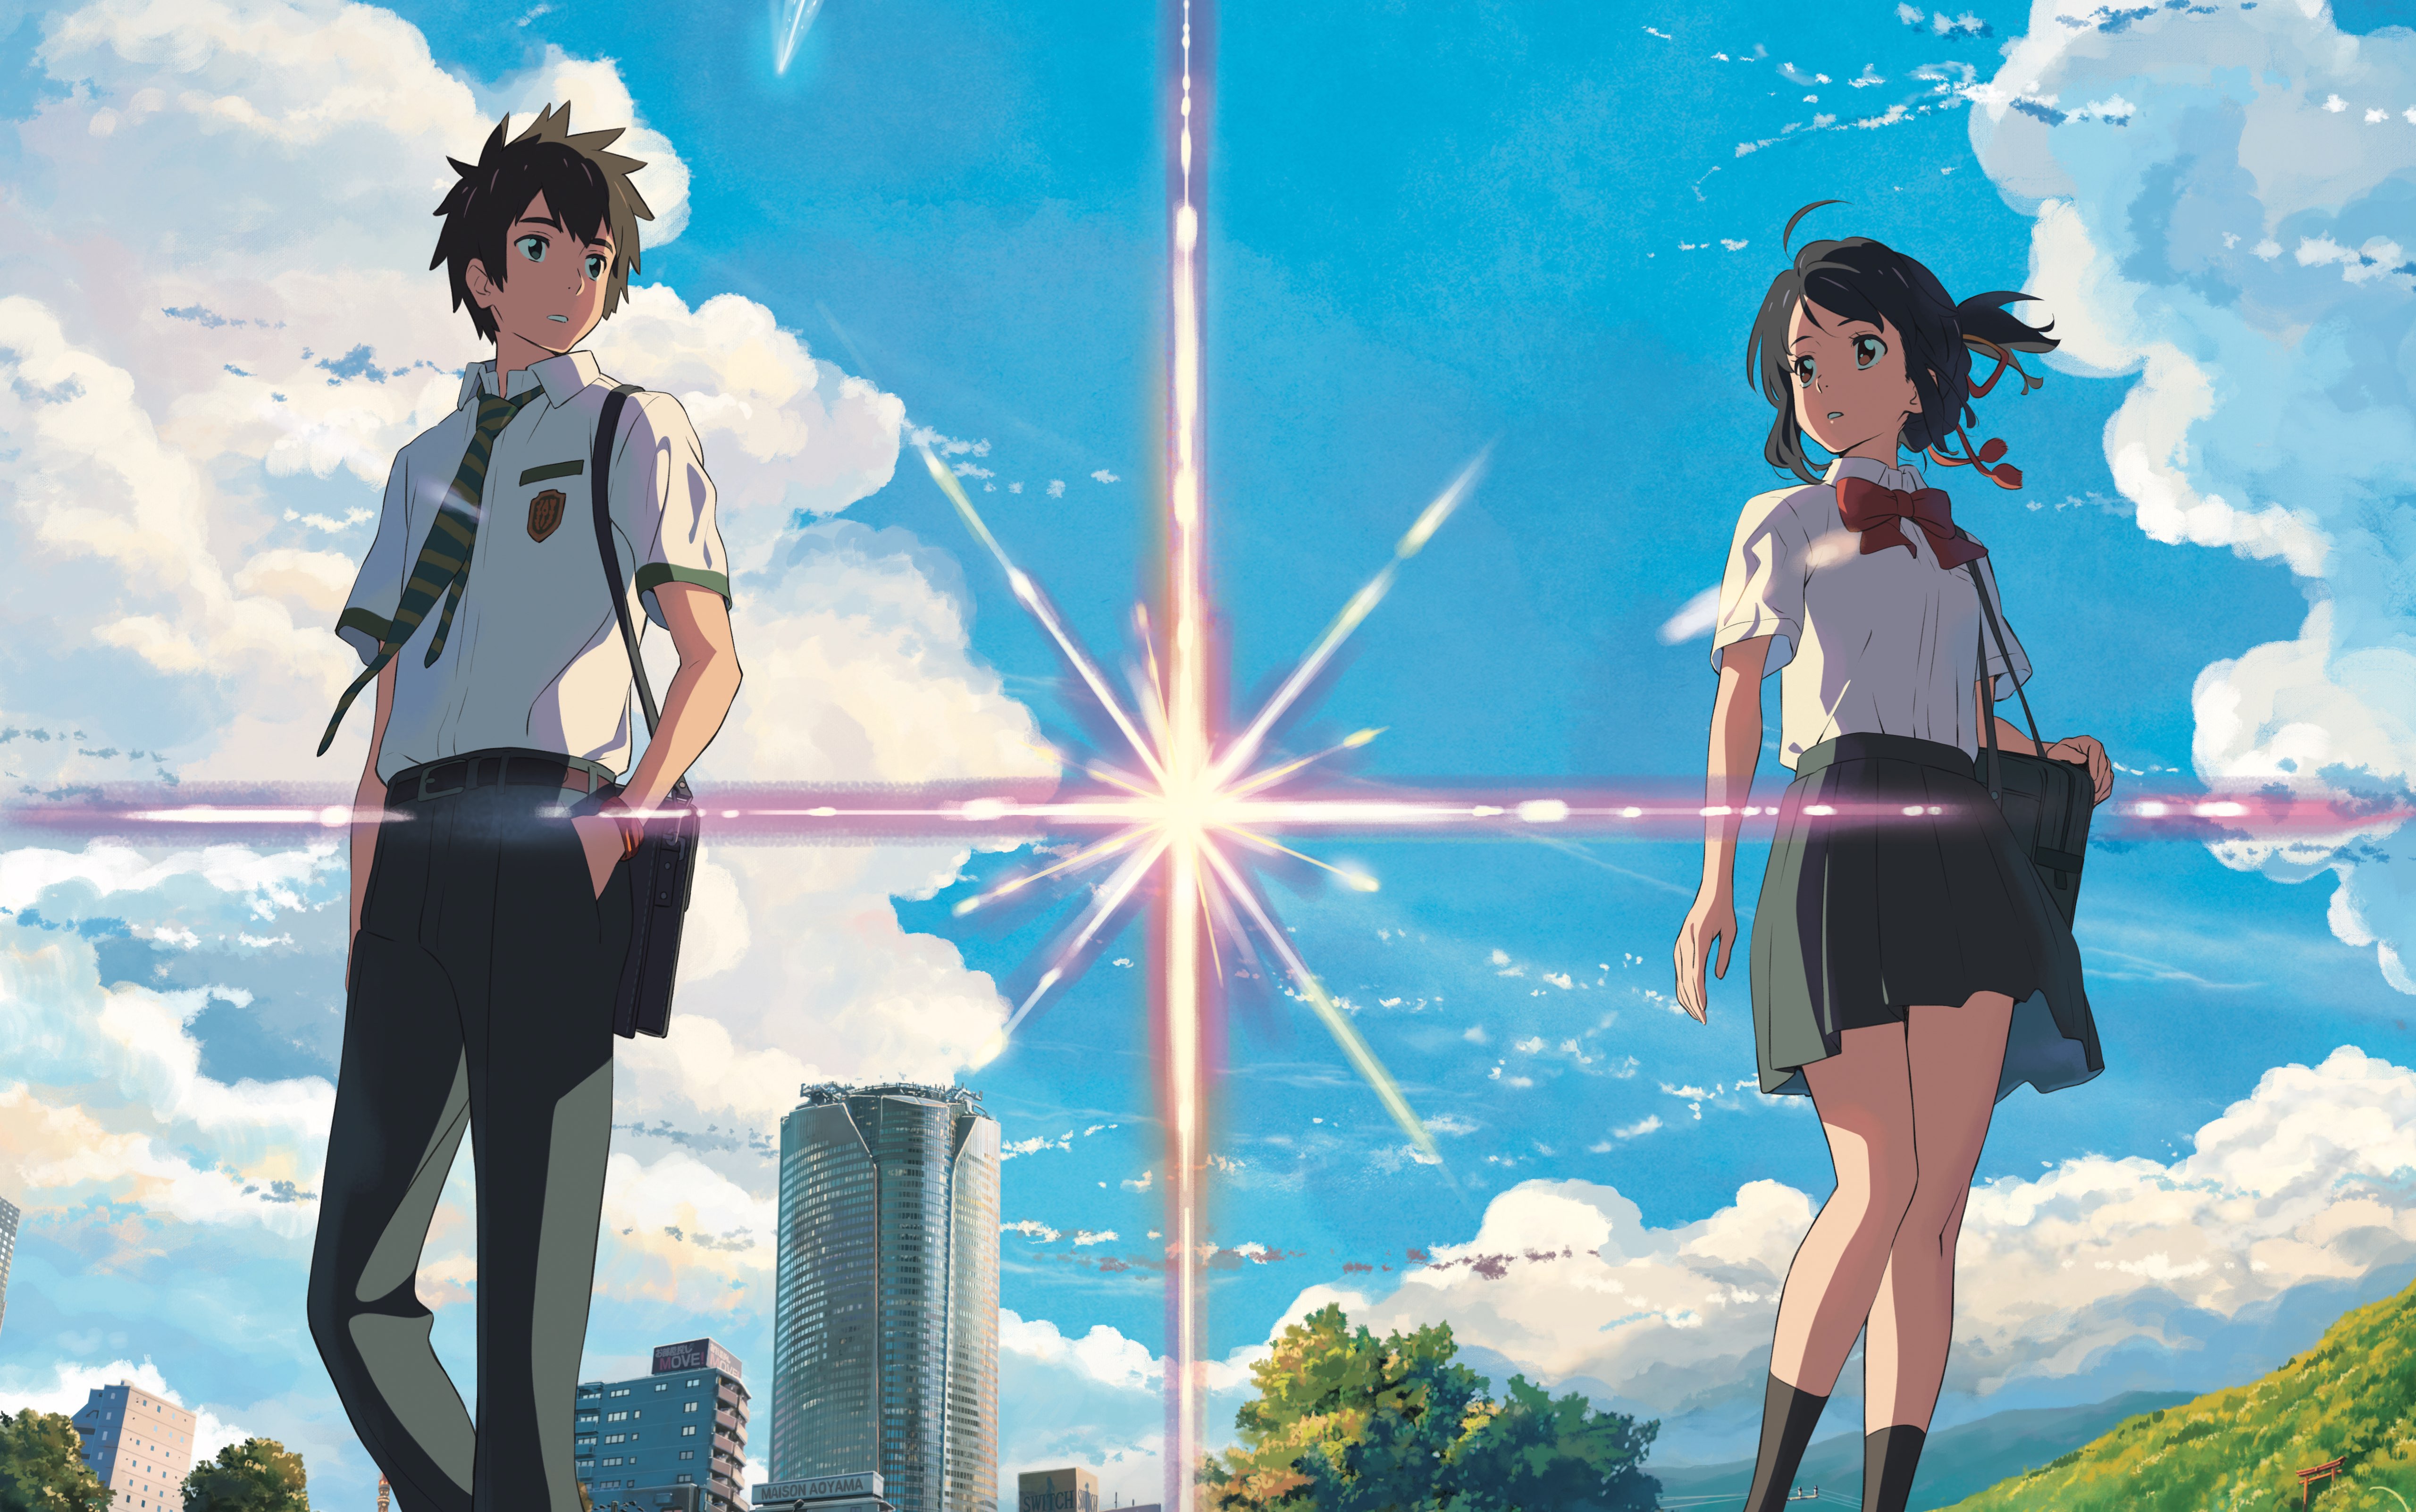 your name movie review essay